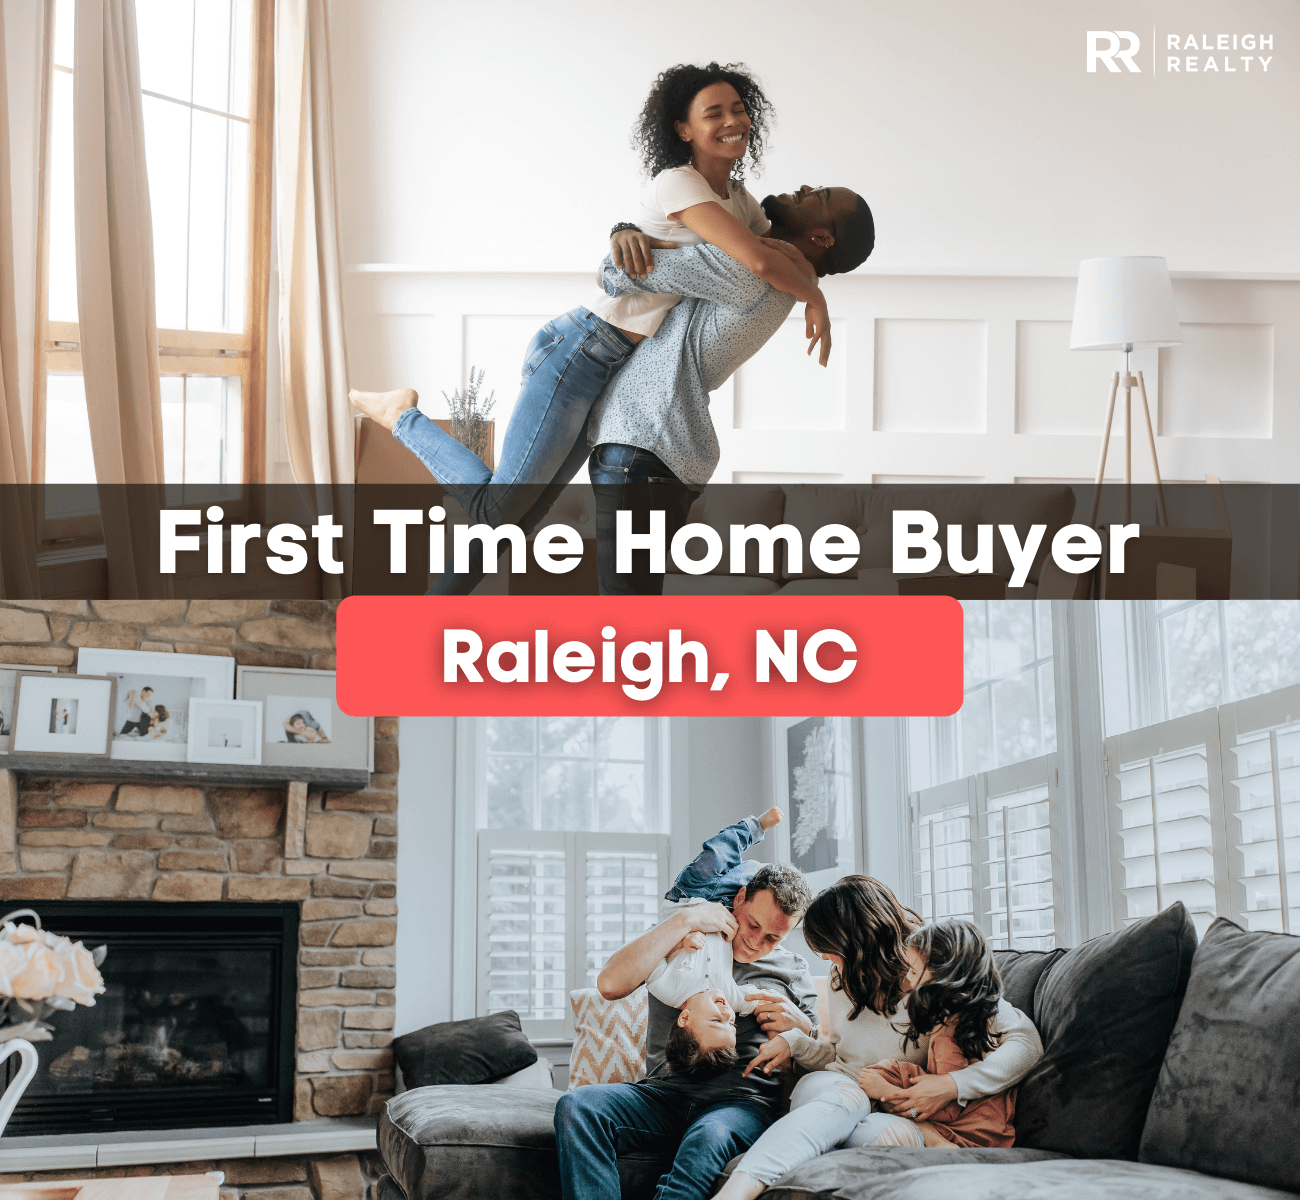 First Time Home Buyer Guide Raleigh NC - Buying a house for the first time!